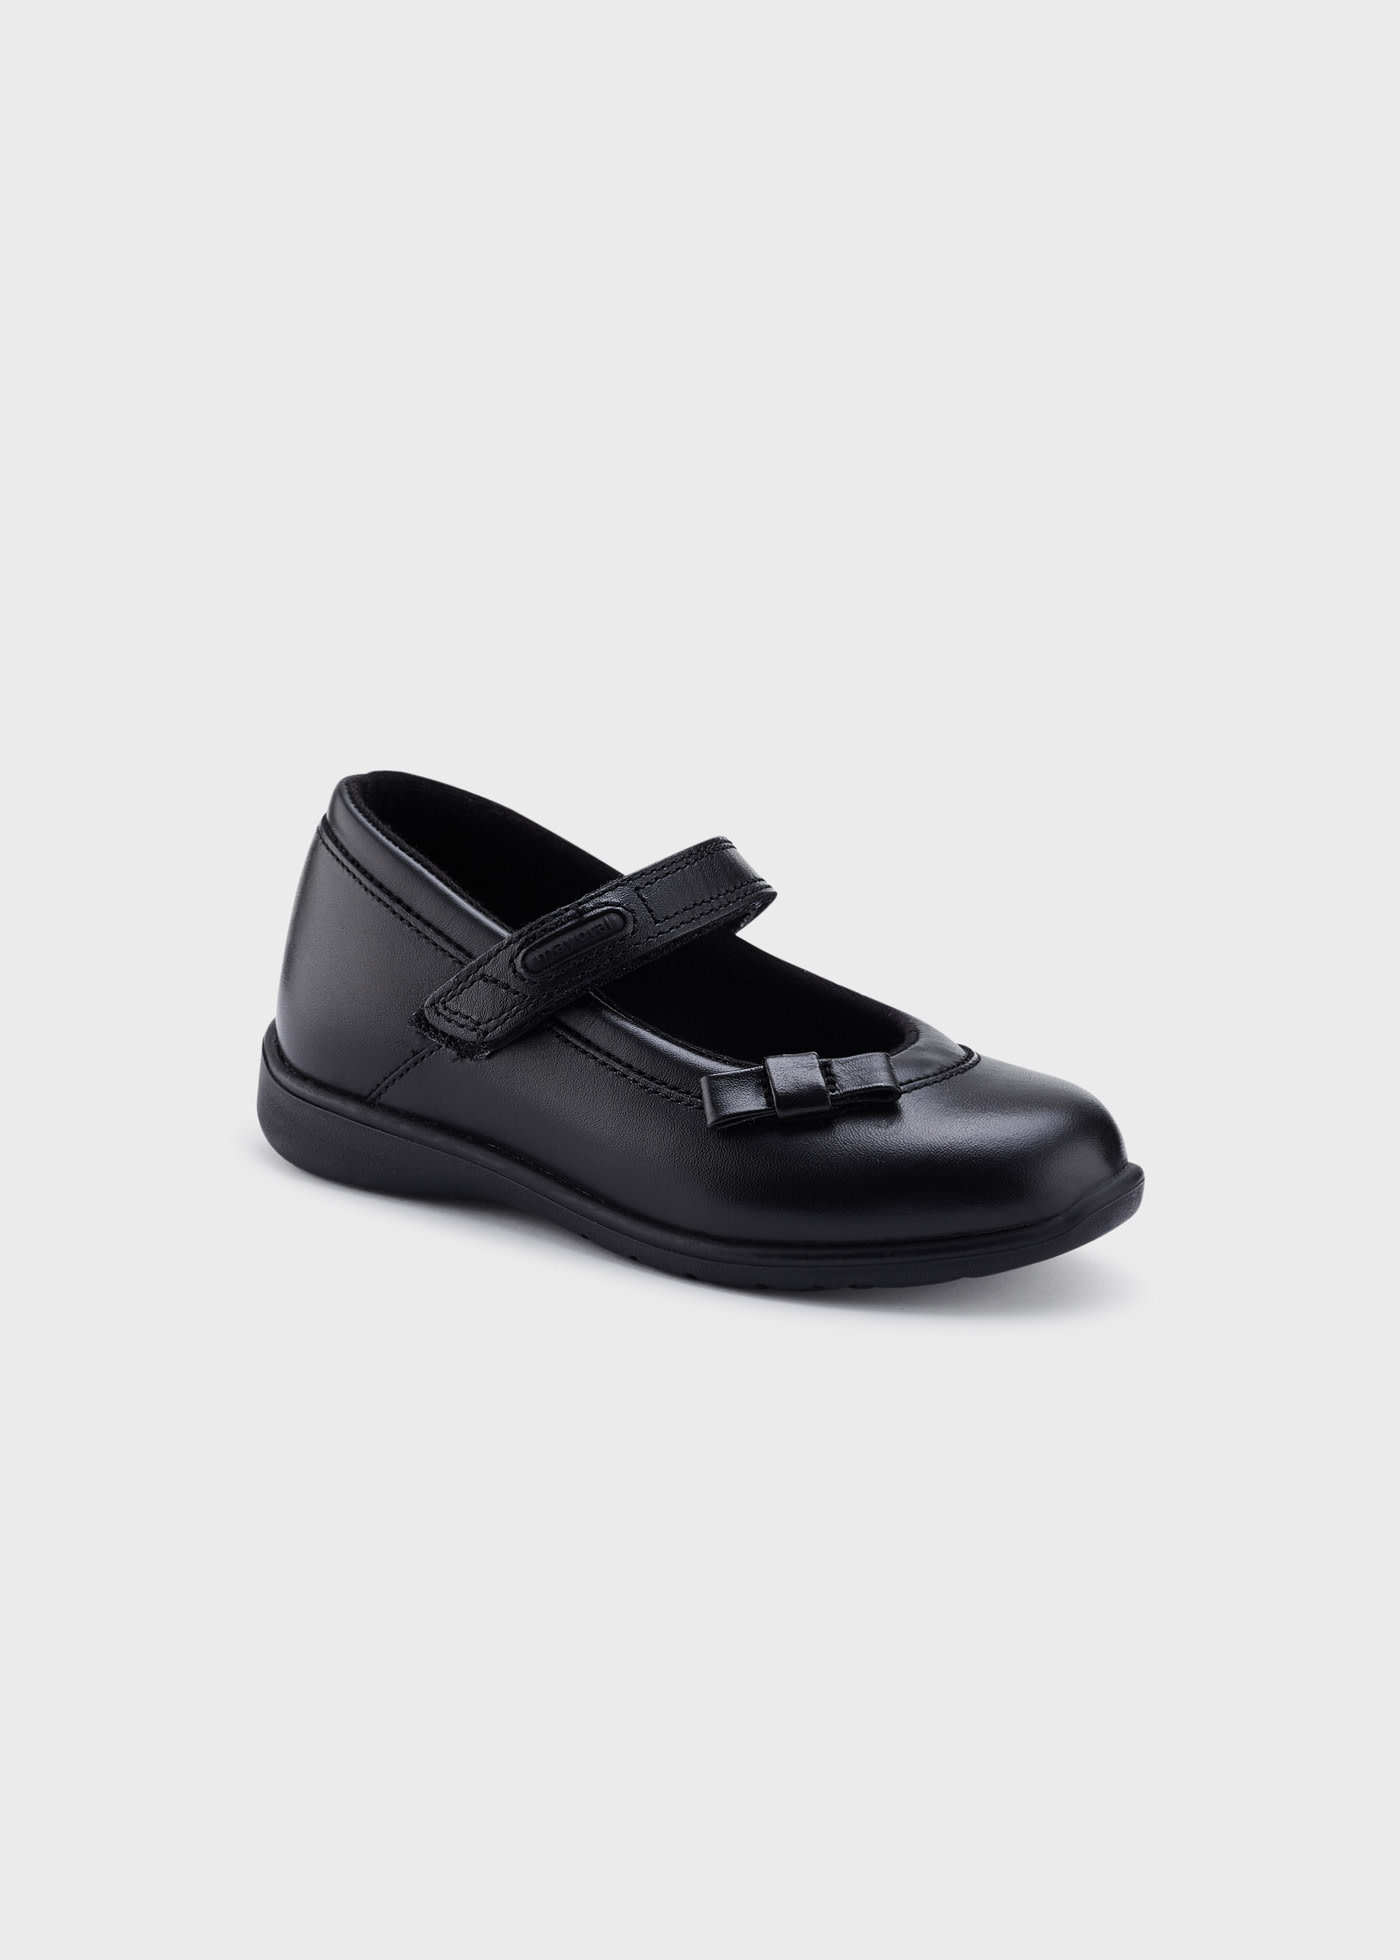 School shoes for girl